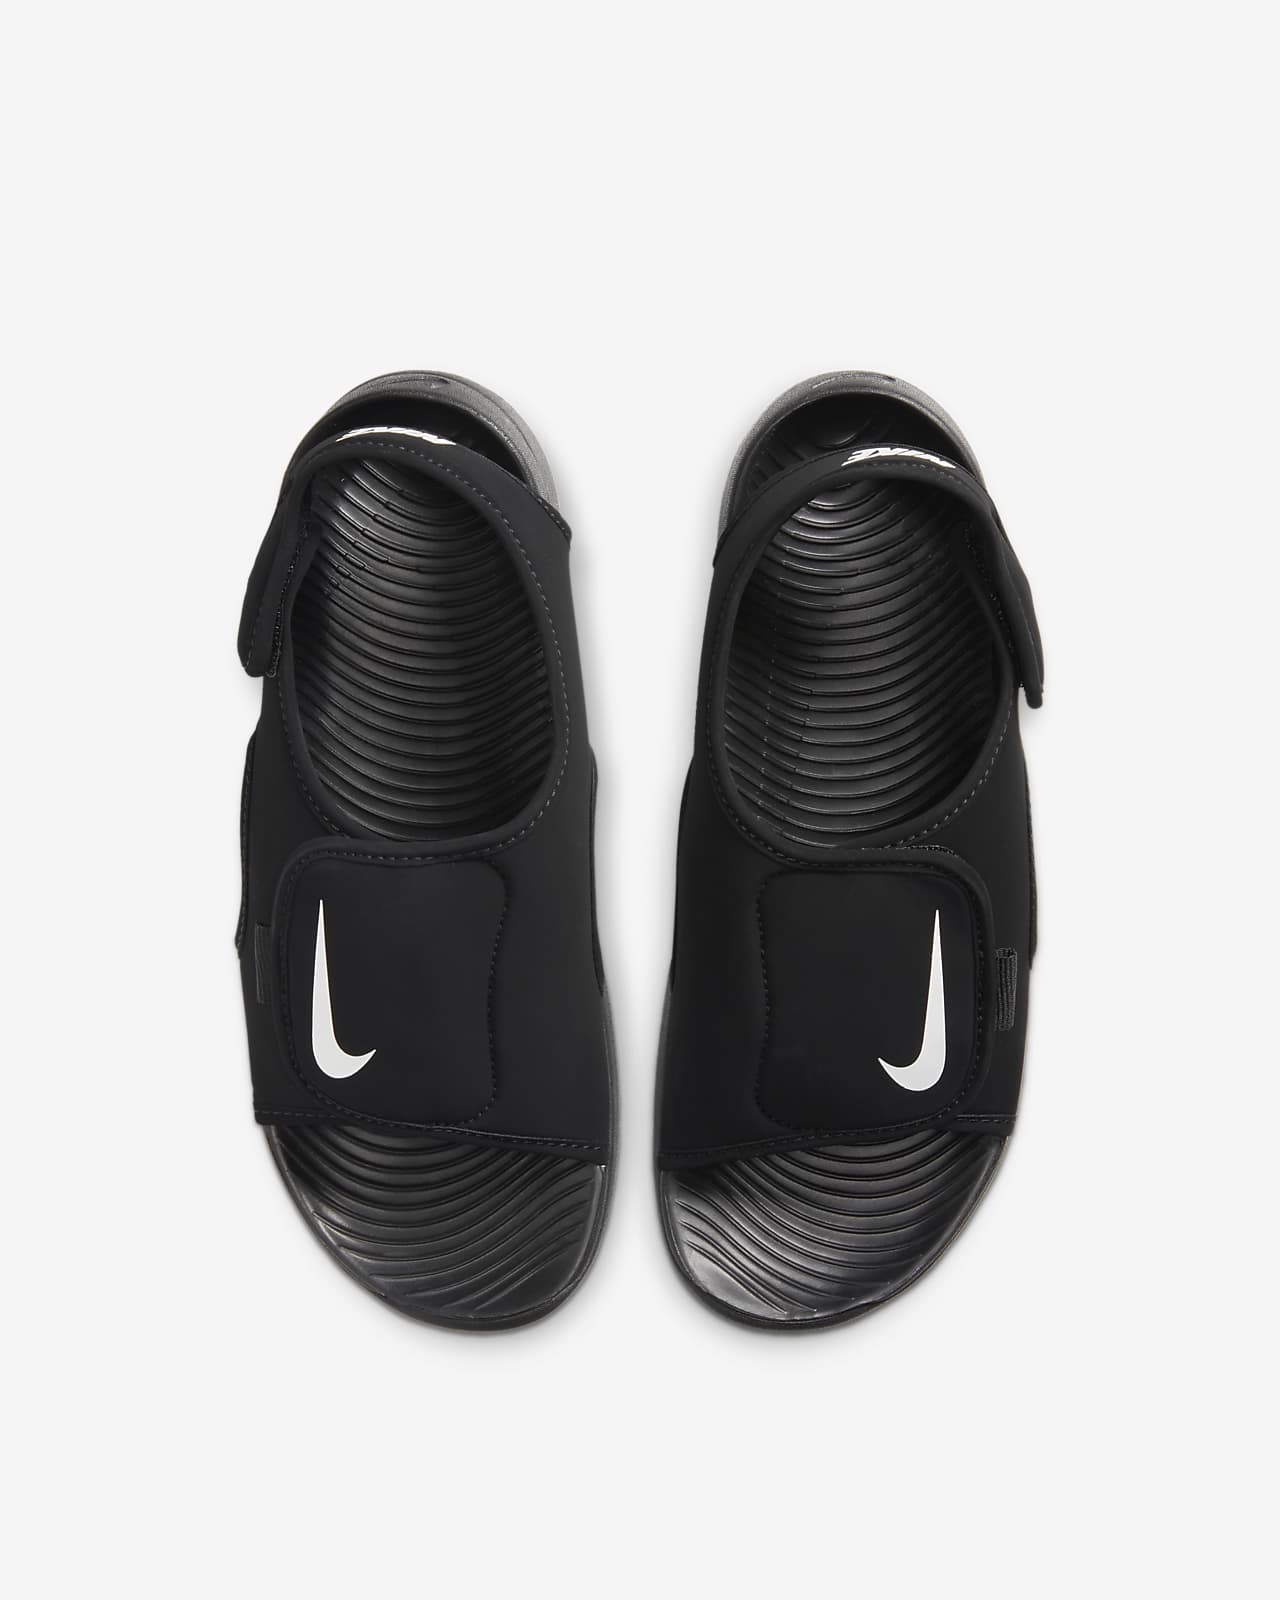 Nike Sunray Adjust 5 V2 Younger and 